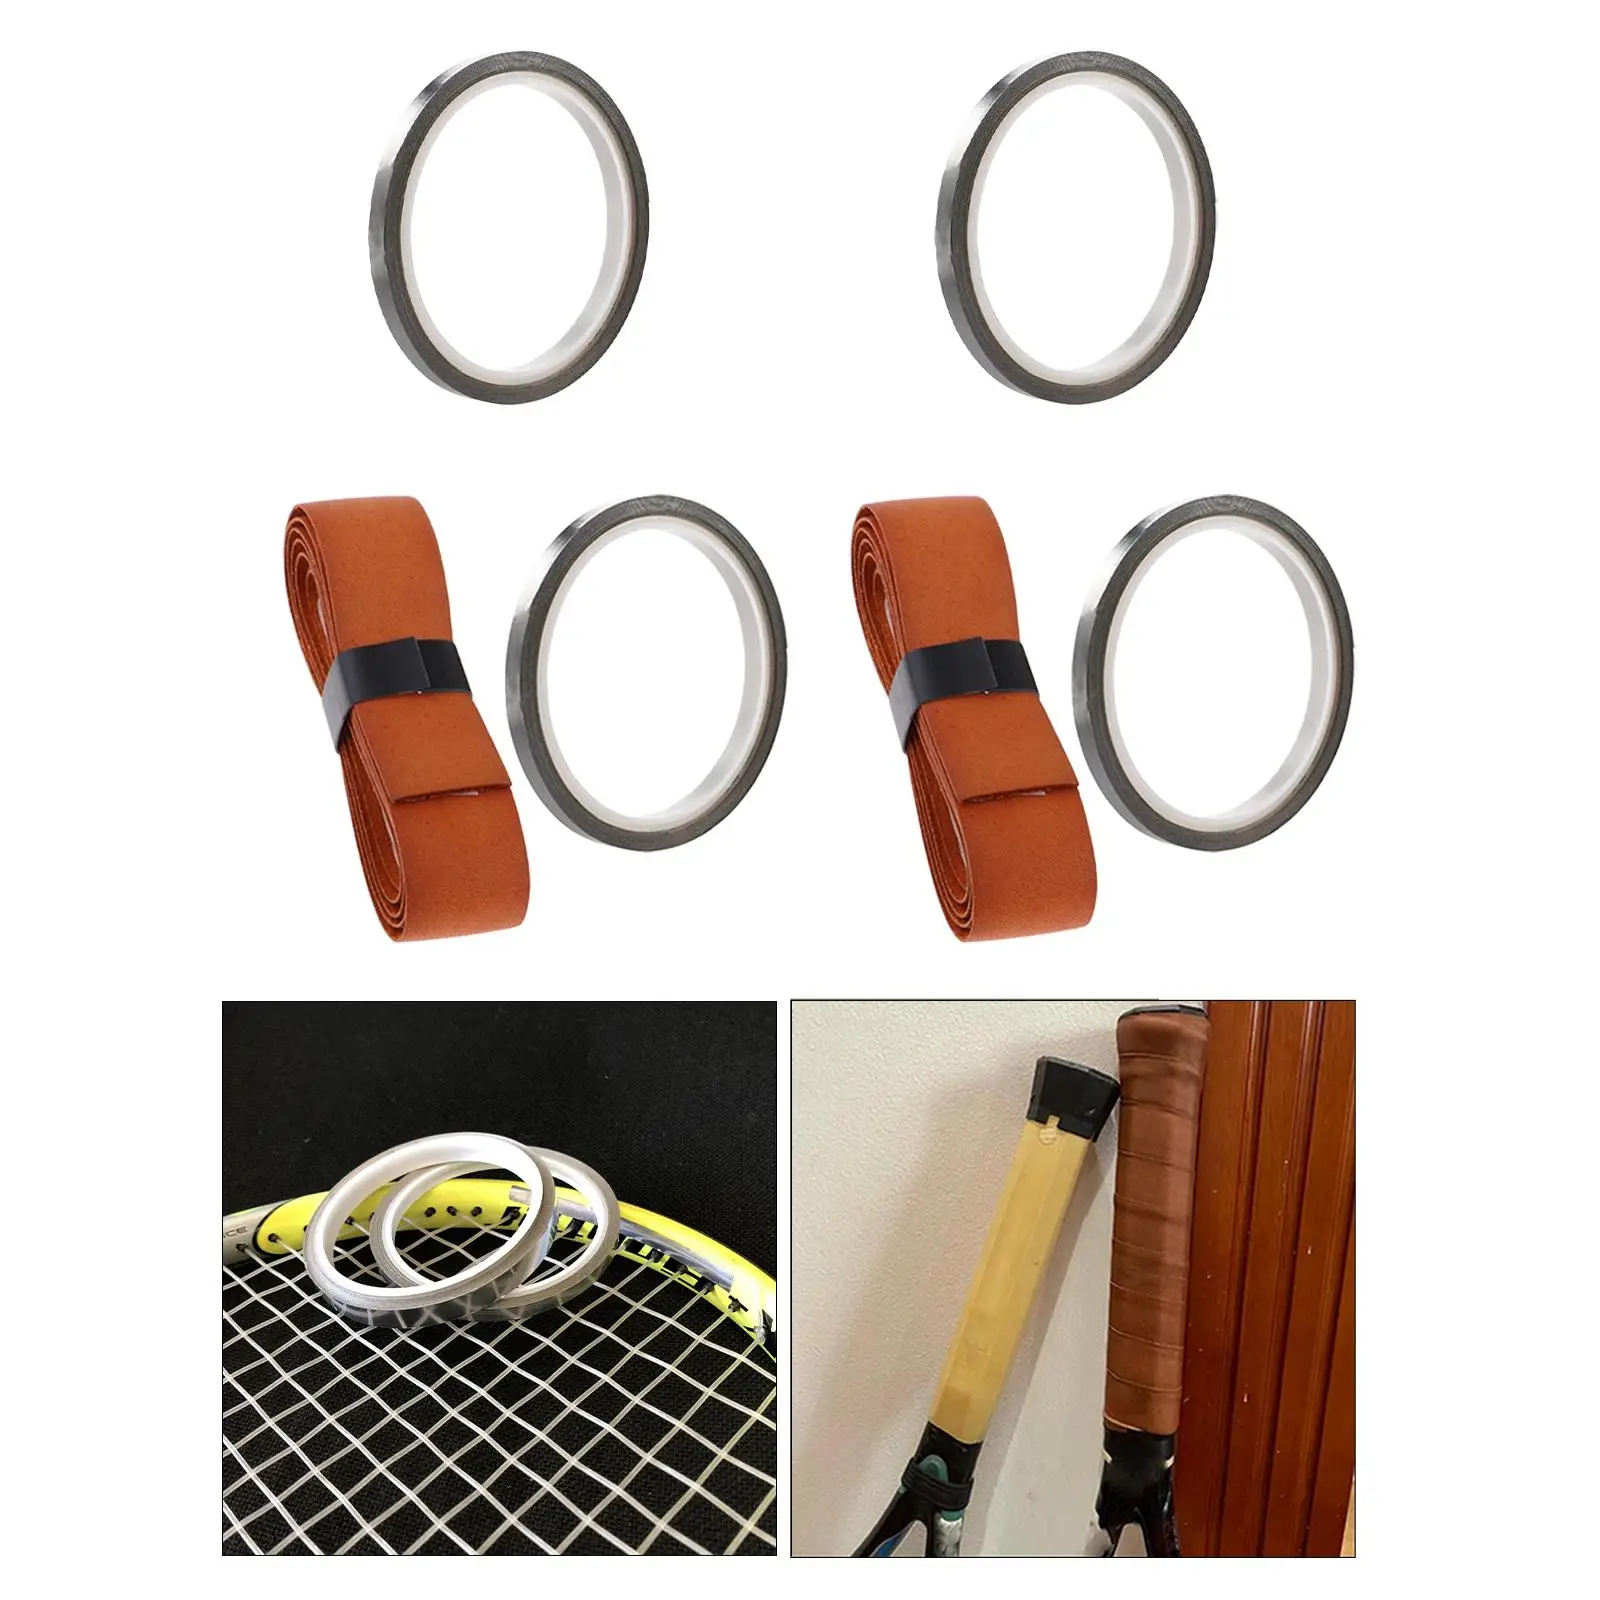 Tennis Racket Weight Tape Training Aid Trainer Equipment Weighted Strips